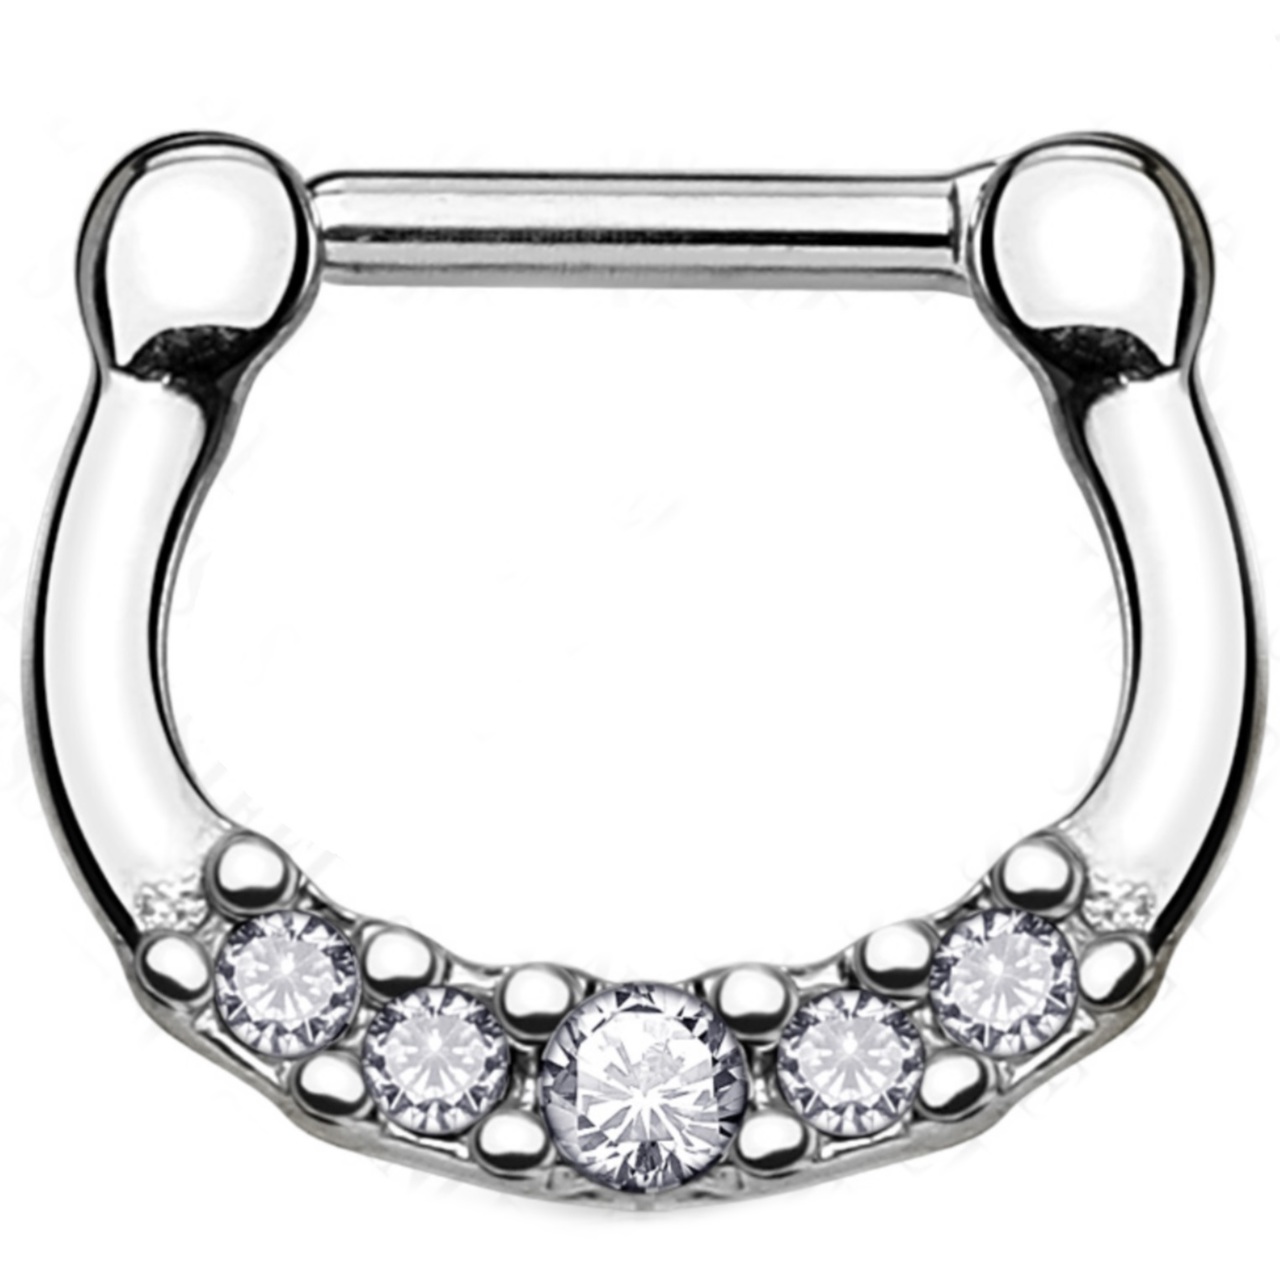 Five Clear Crystal Accent 100% Steel Septum Clicker | BodyDazz.com